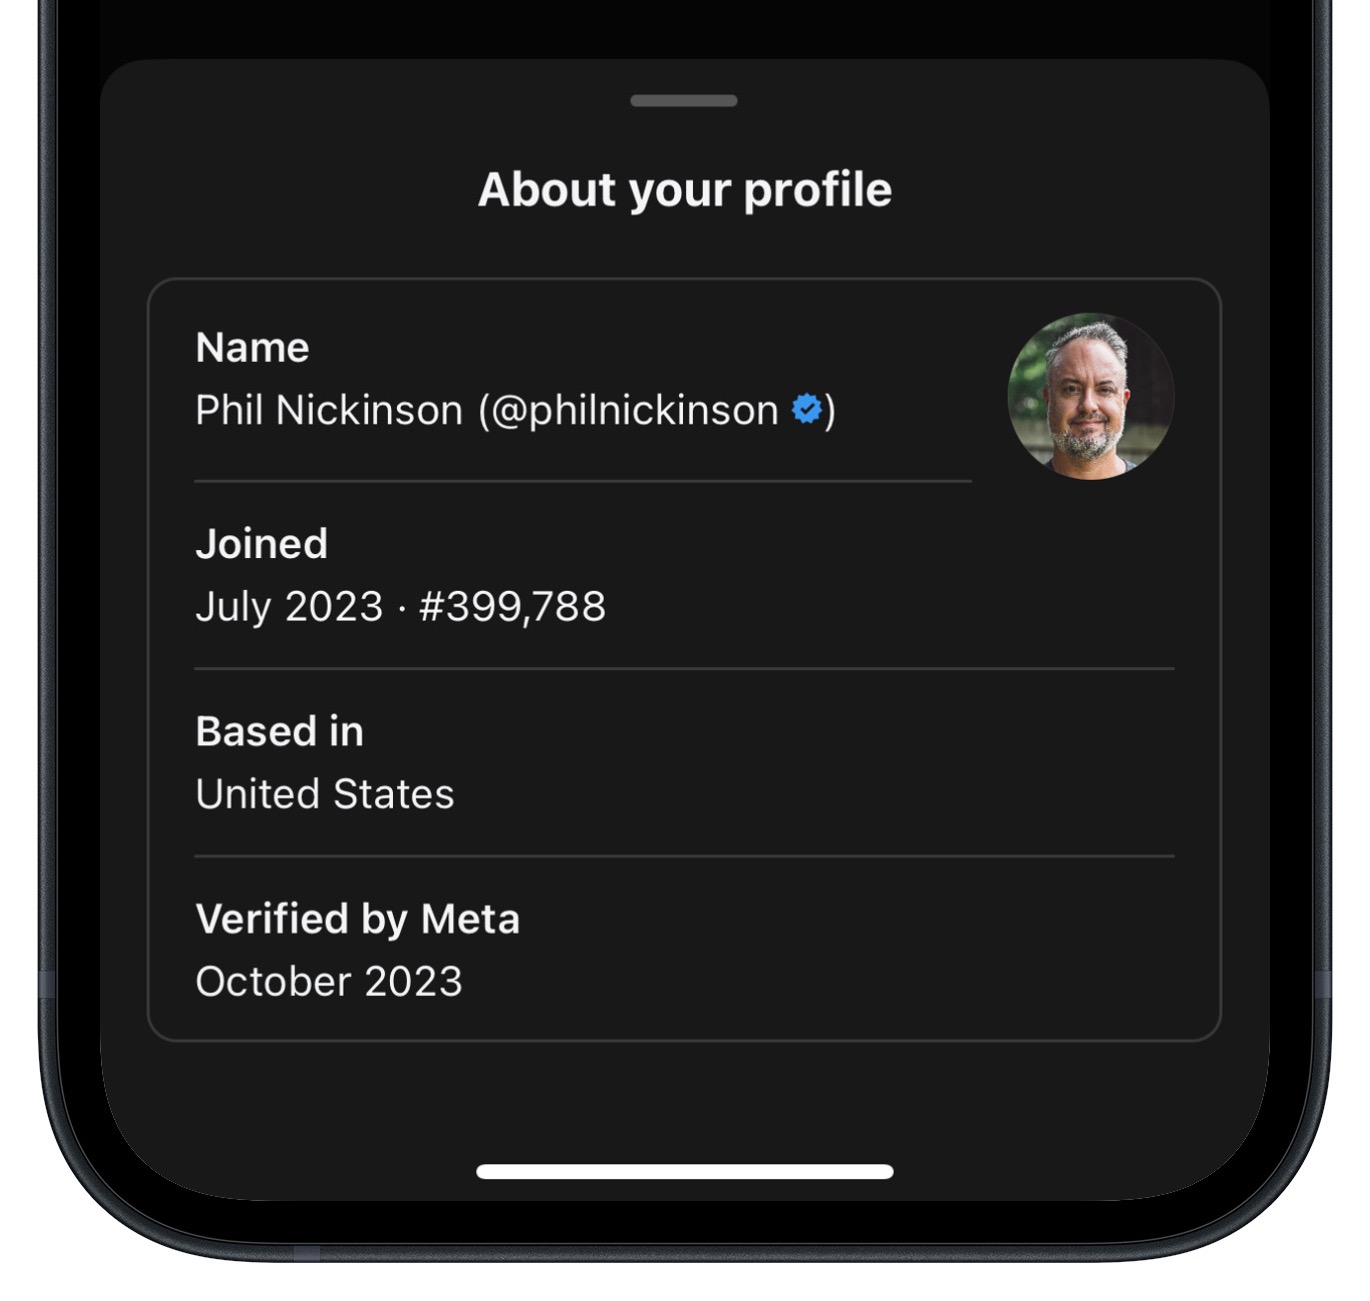 Your profile information as seen in the Threads app.